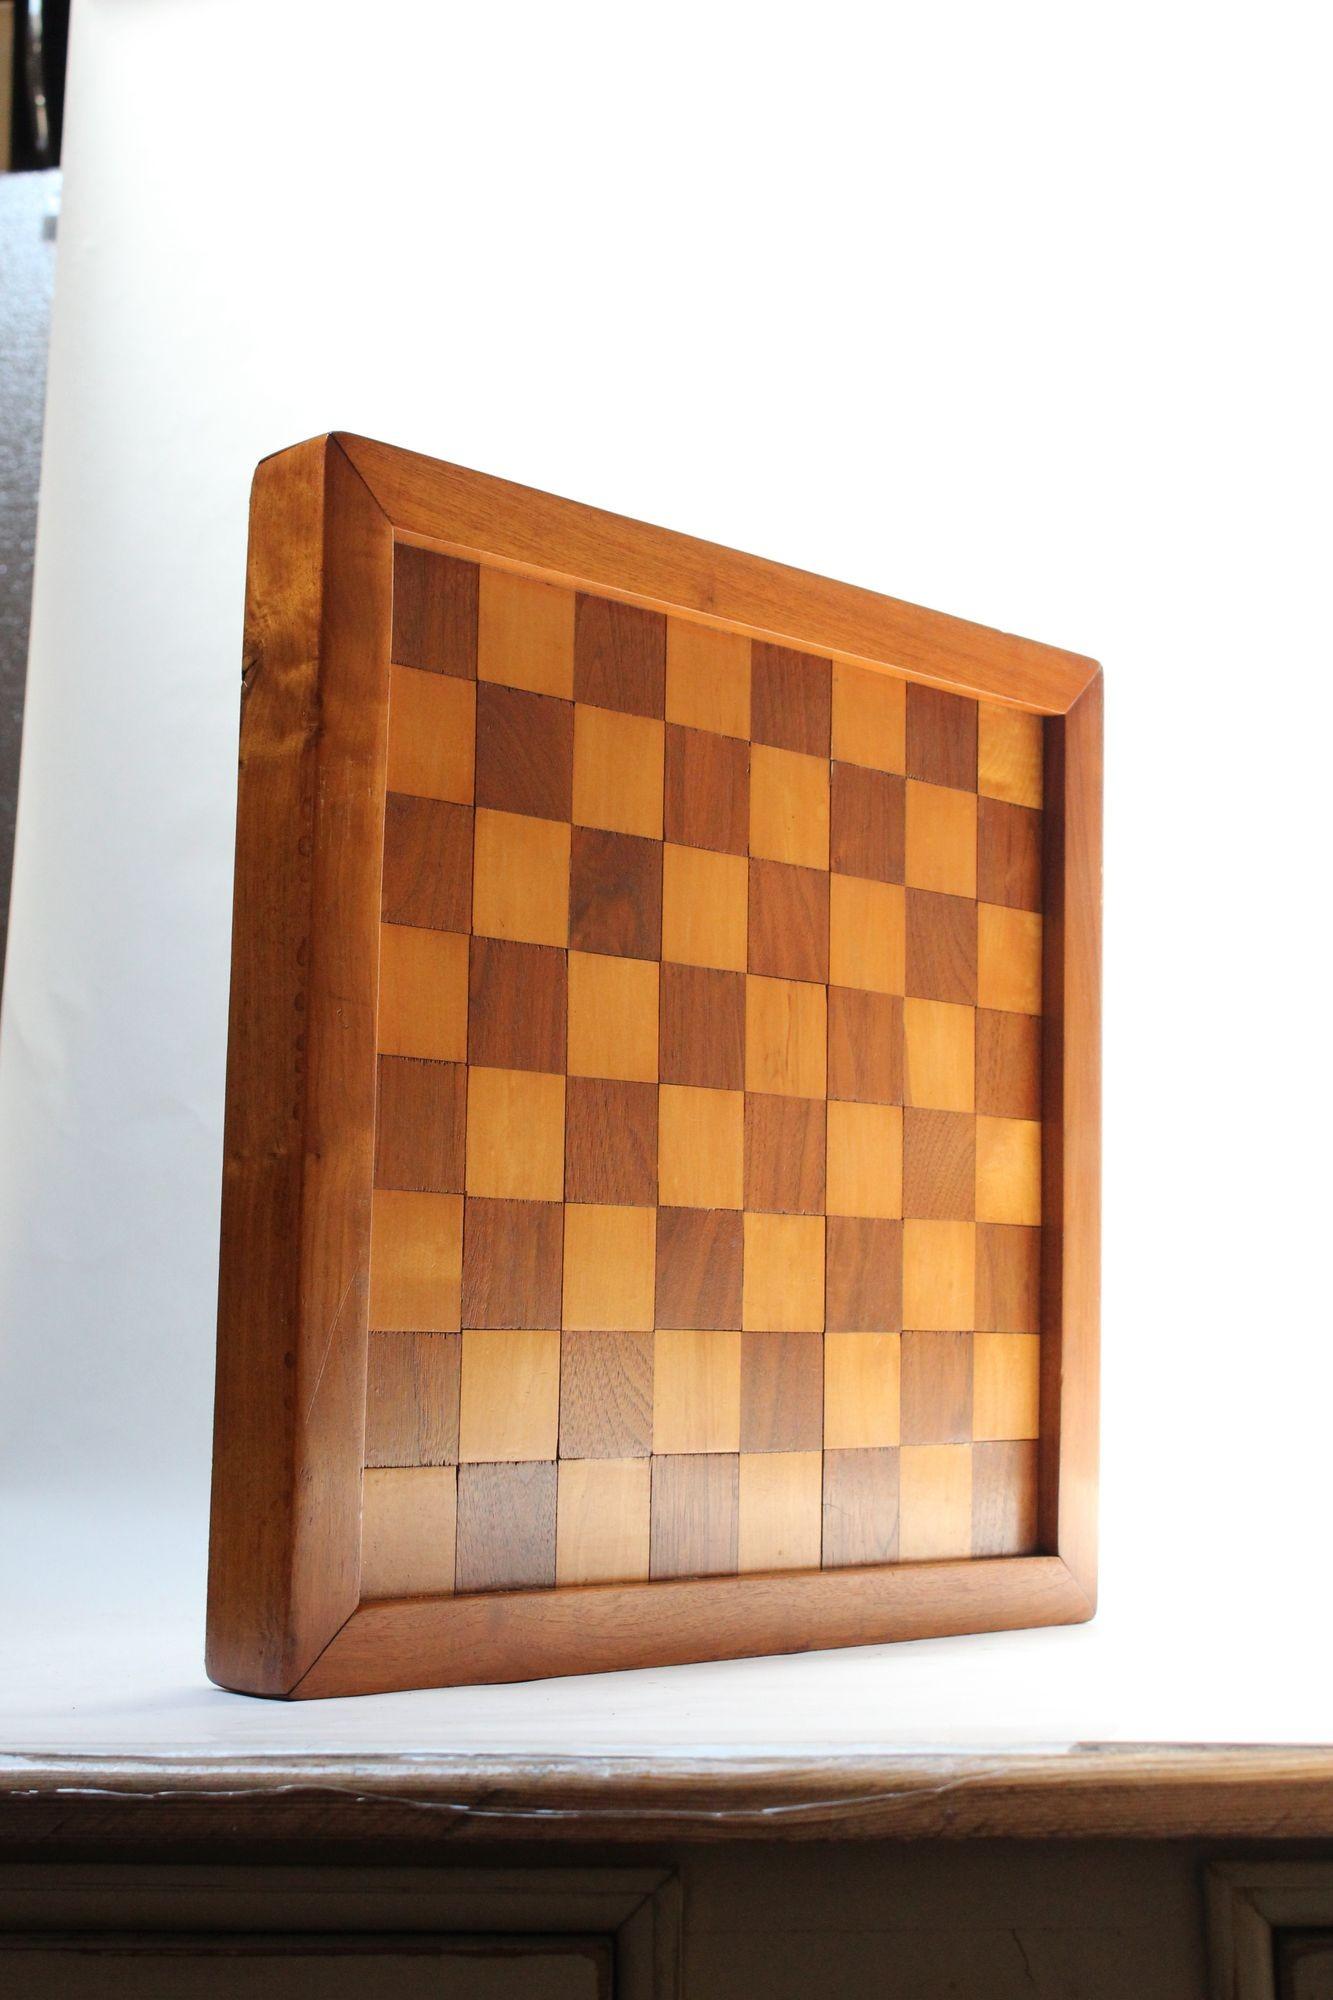 Deeply inset solid walnut and beech chess / checkerboard within a carved walnut border (ca. 1970s, USA). Dense board is supported by cylindrical feet, all green felted for table protection.
Good, vintage condition with light wear consistent with age